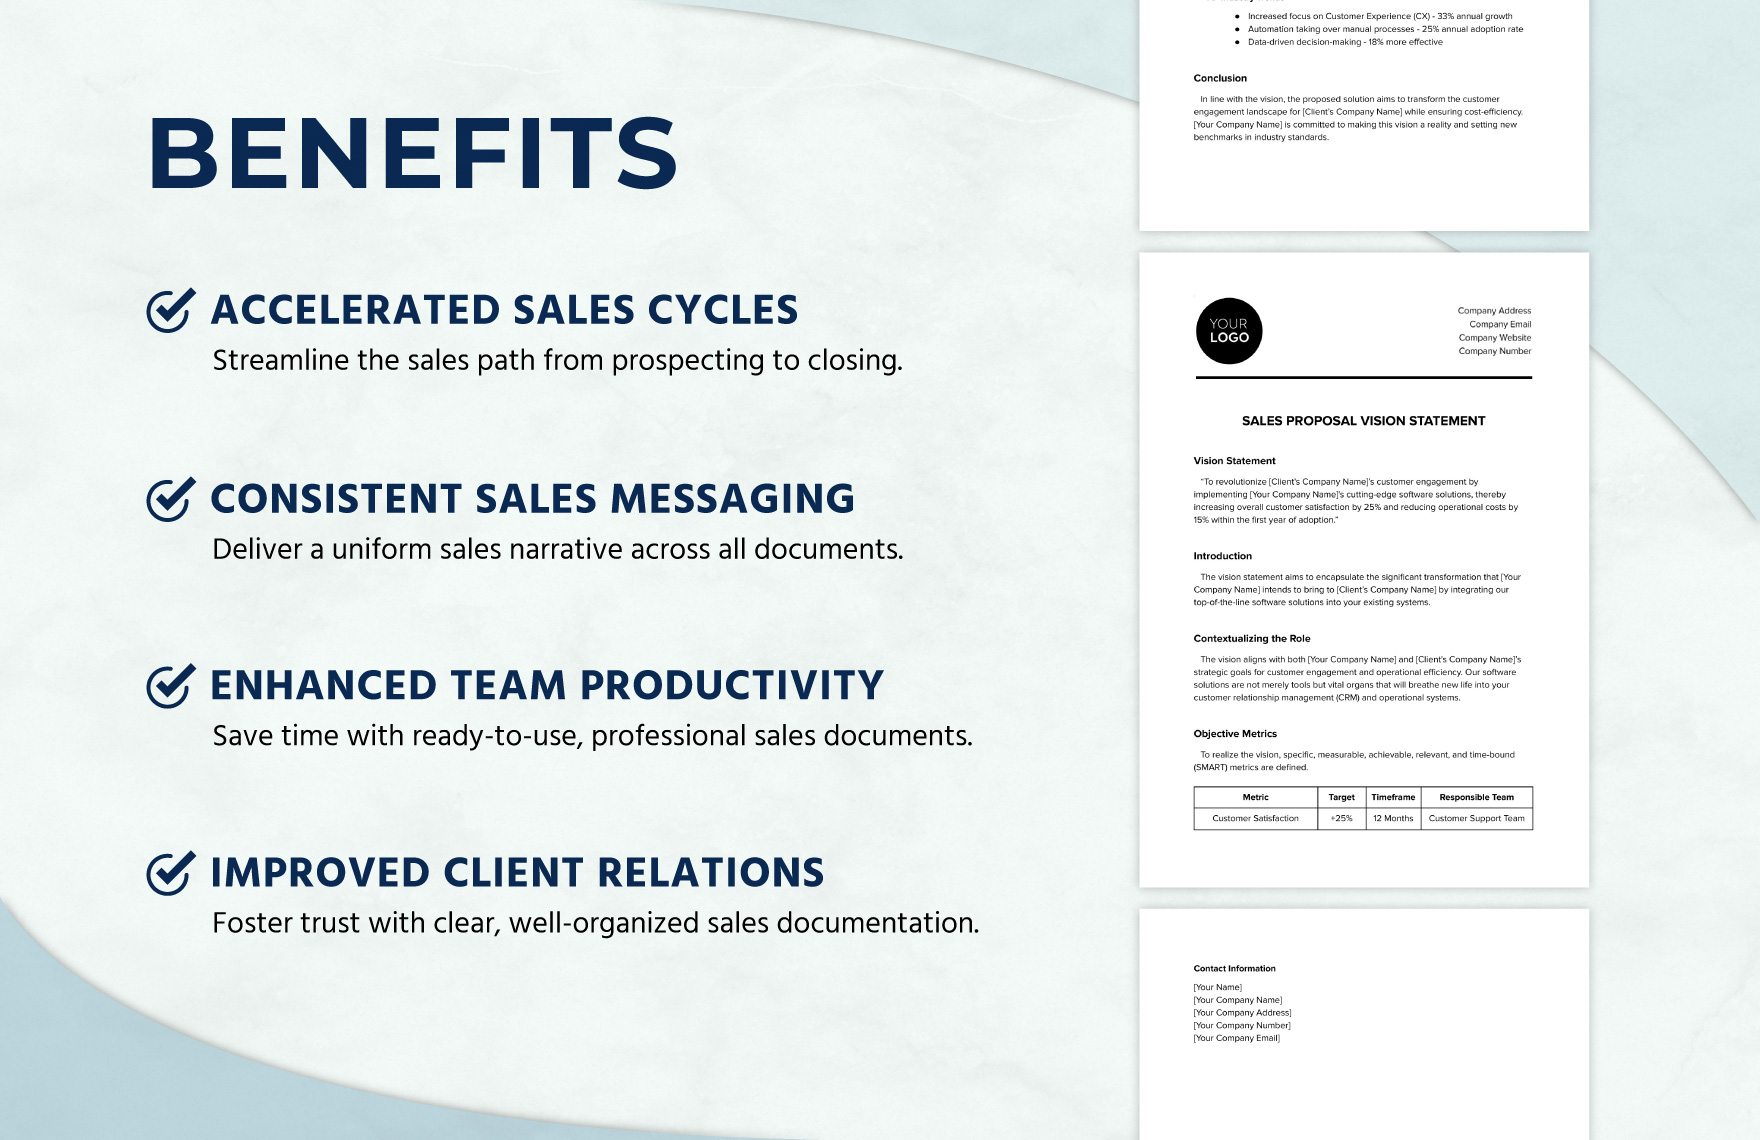 Sales Proposal Vision Statement Template